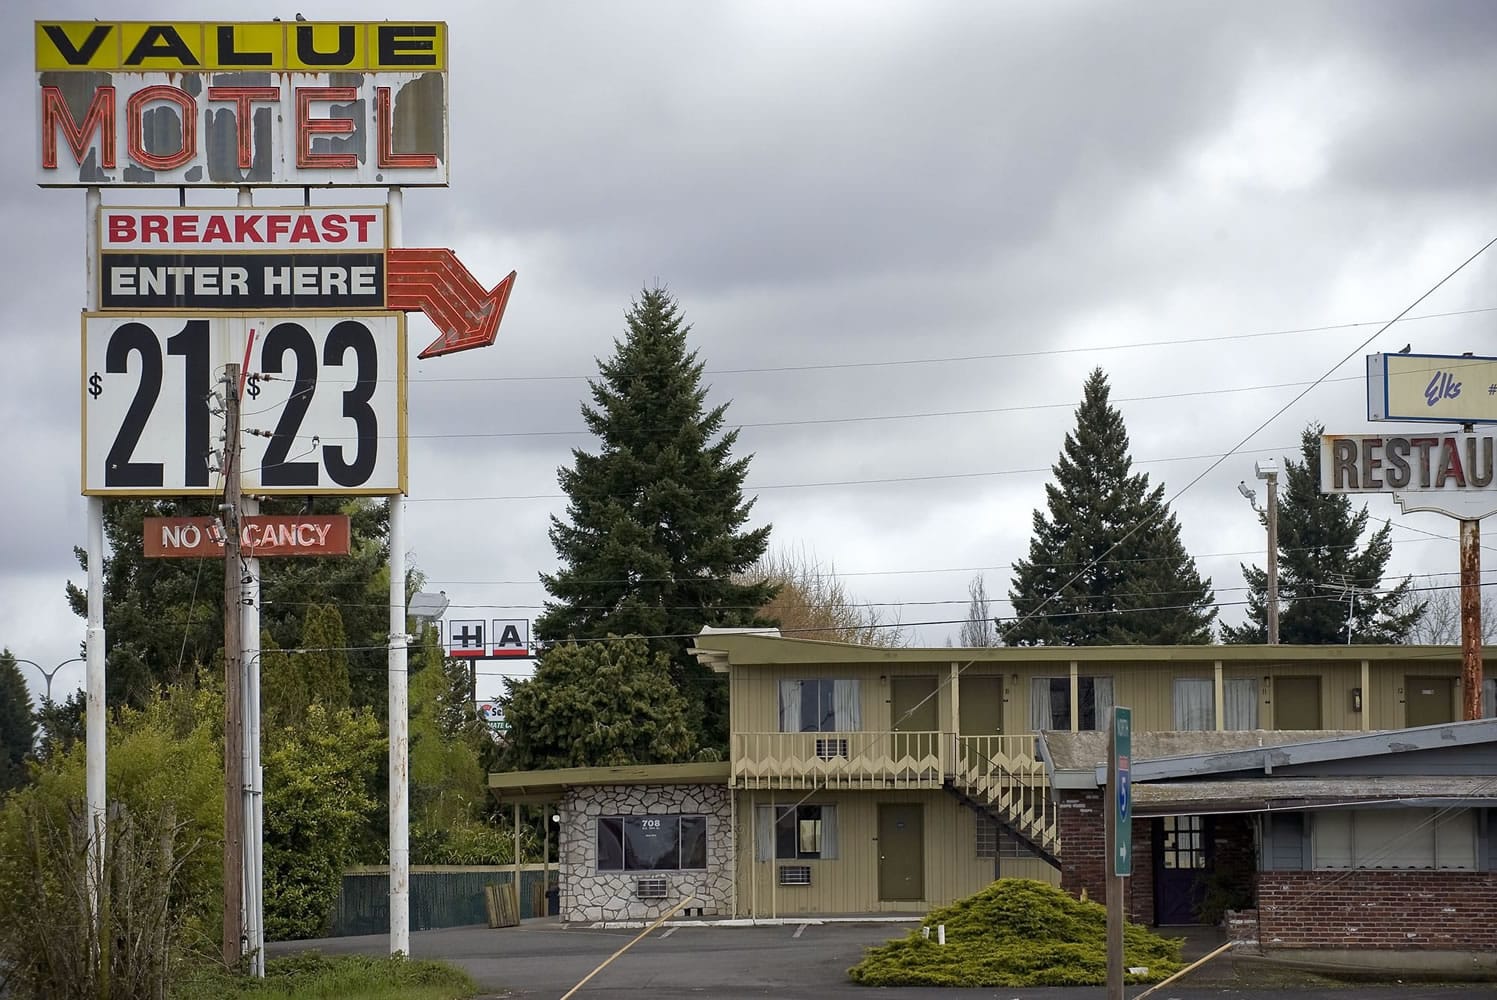 The Value Motel, near 78th Street and Highway 99 in Hazel Dell.